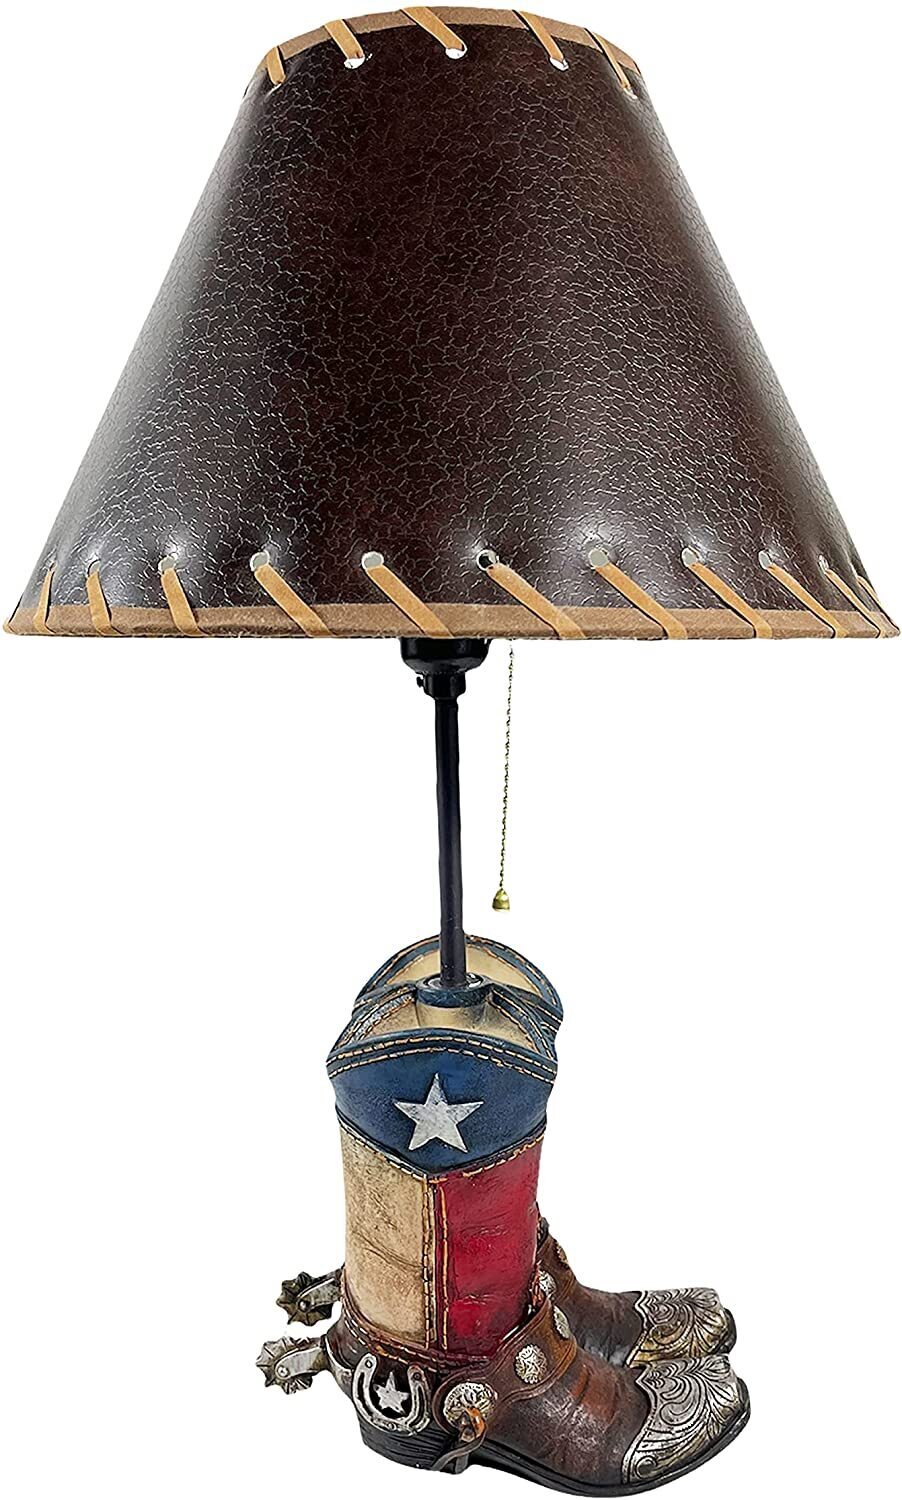 Cowboy double boot lamp